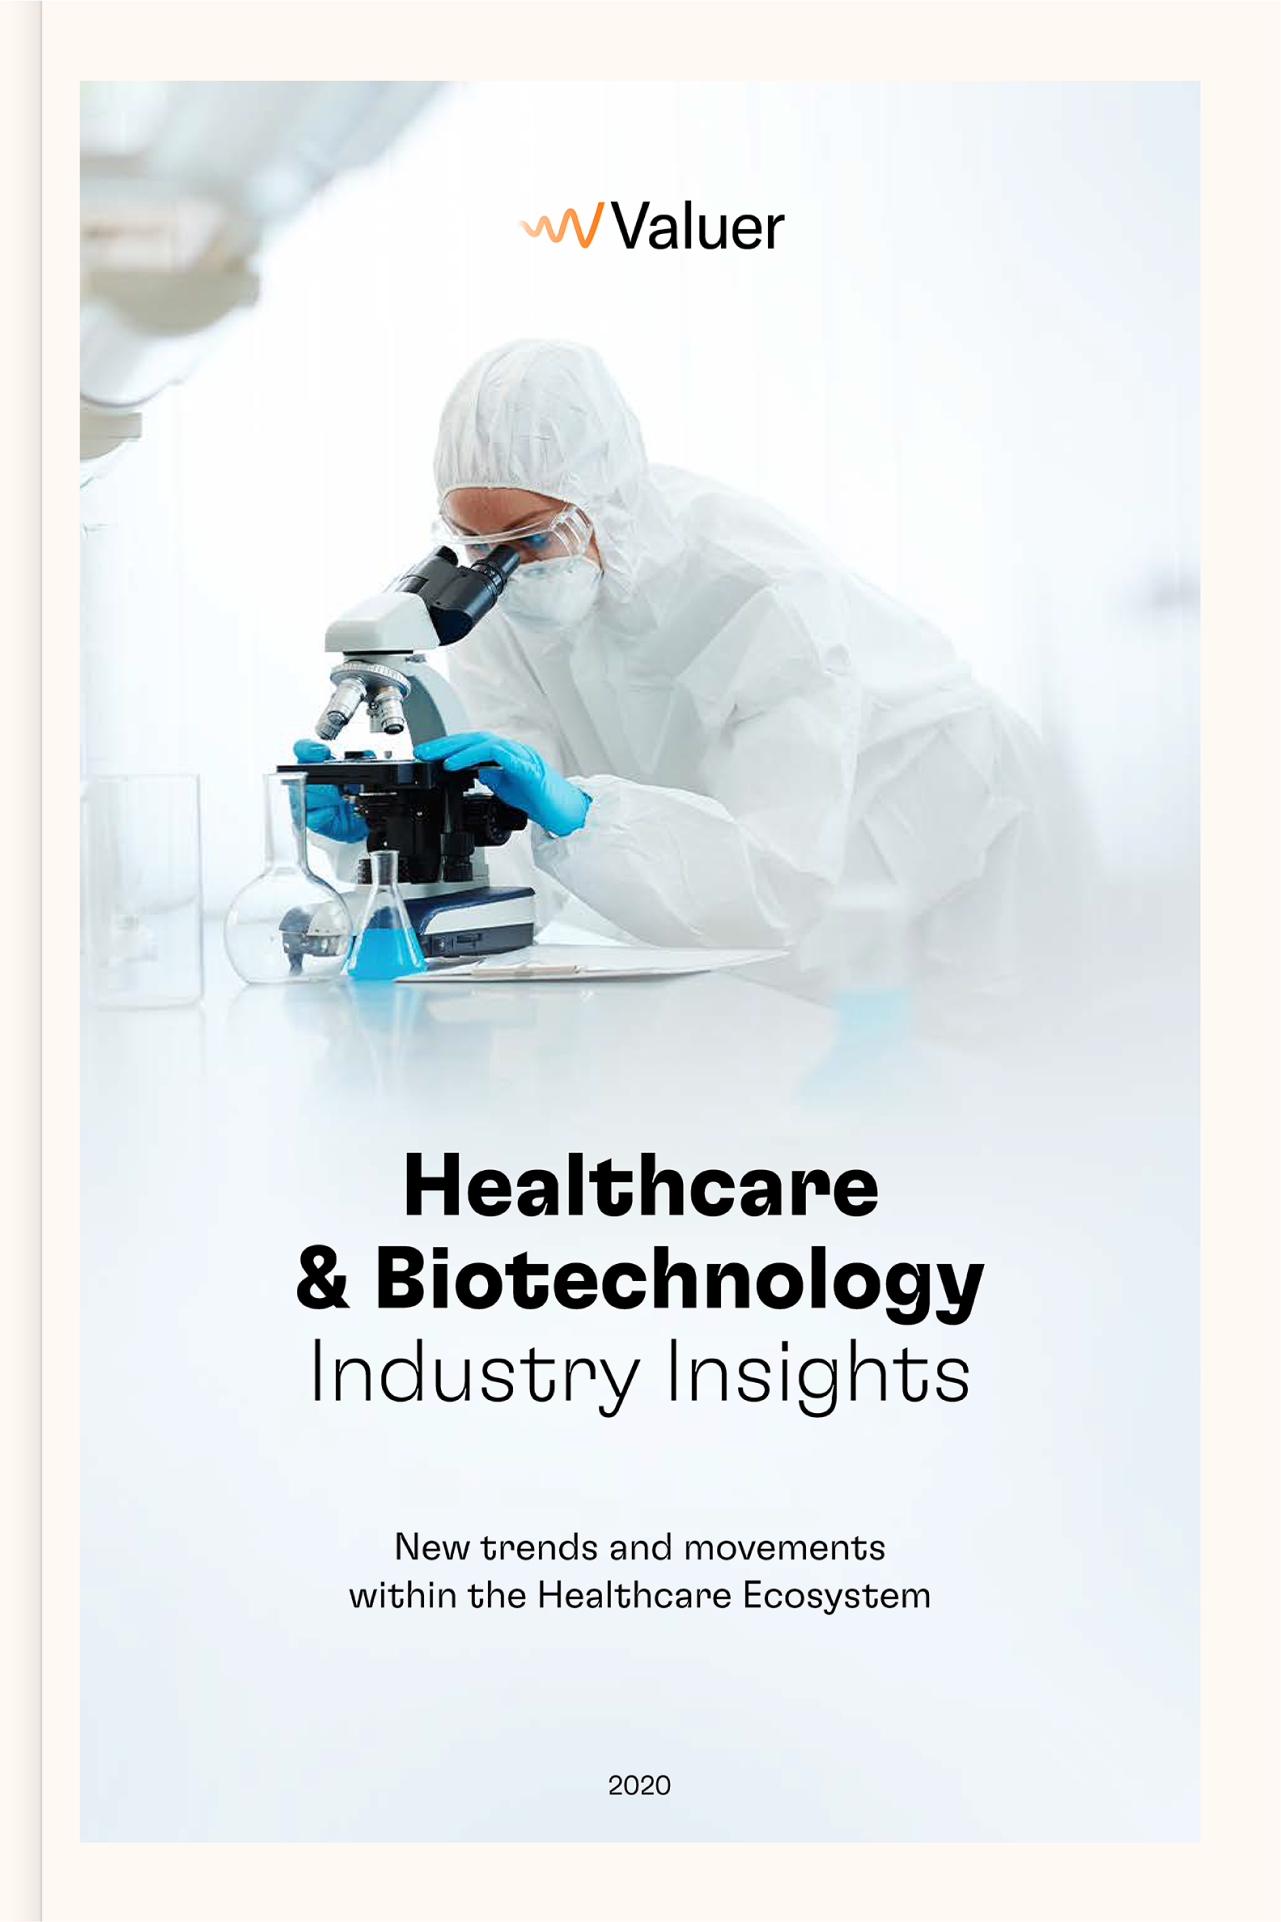 Healthcare and Biotechnology industry insights cover